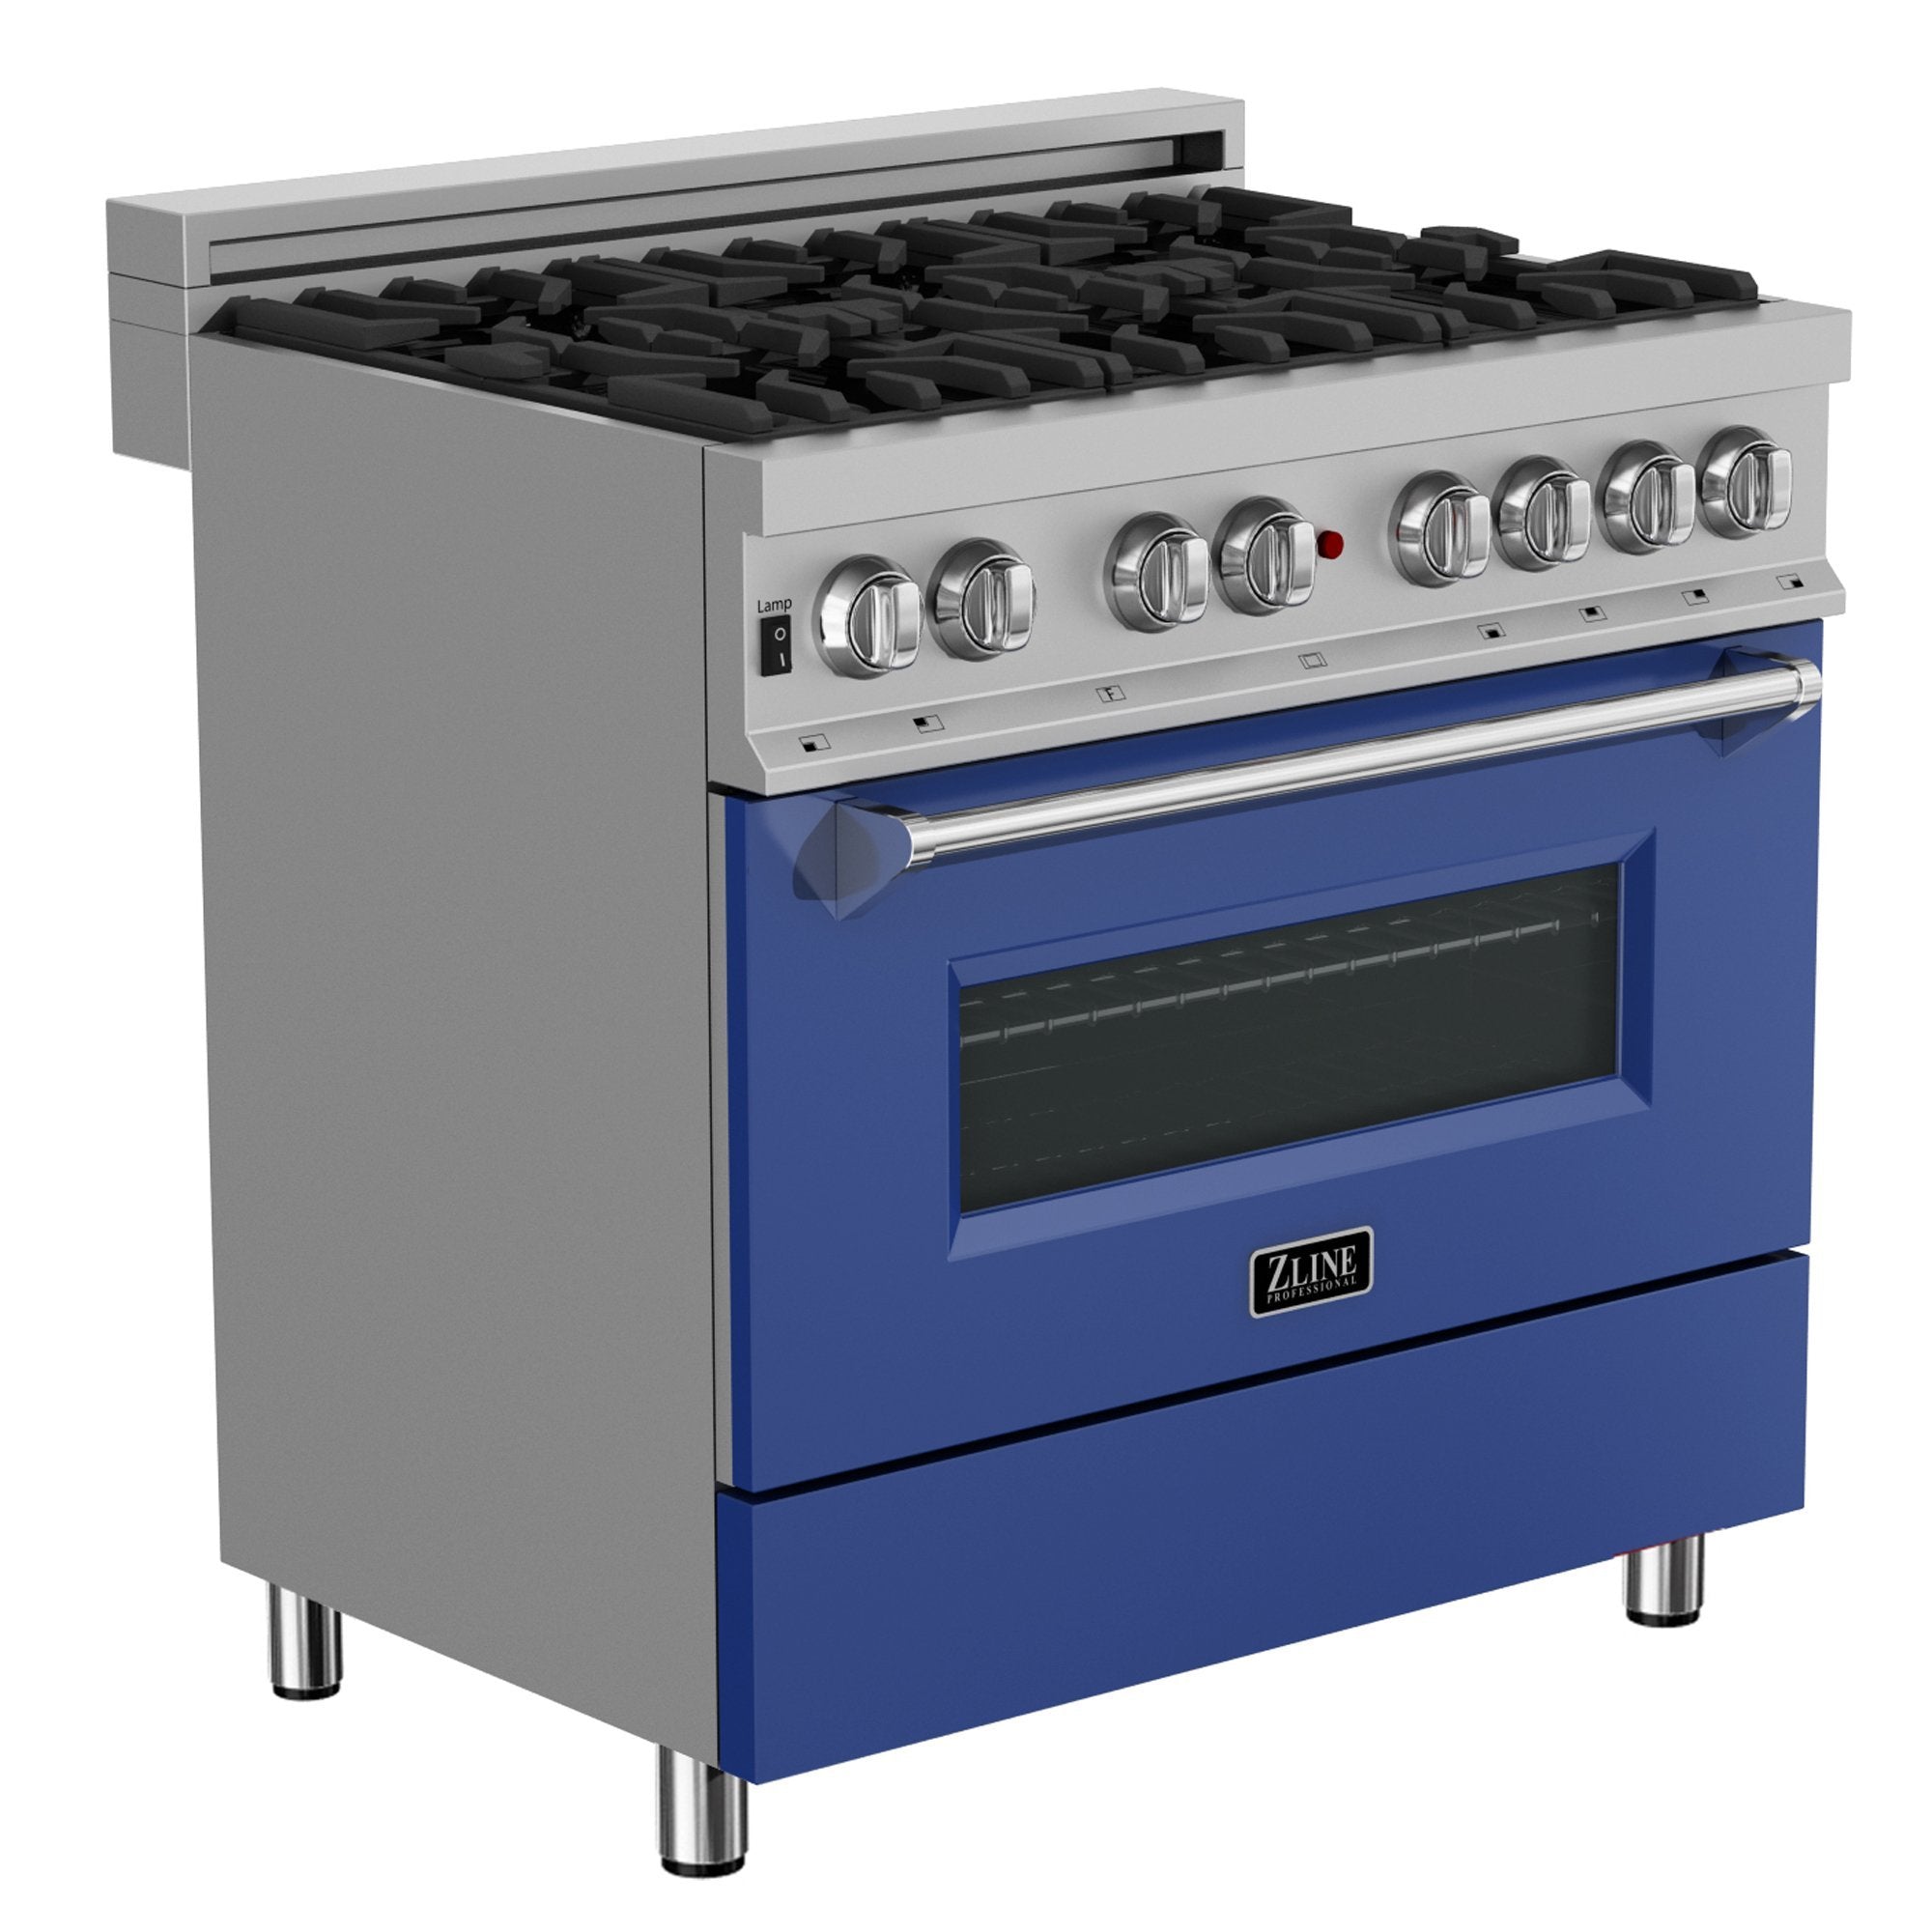 ZLINE 36" Professional Dual Fuel Range in DuraSnow Stainless Steel with Color Door Finishes - Ranges - ZLINE Kitchen and Bath - ZLINE 36 in. Professional Dual Fuel Stainless  | Rustic Kitchen and Bath